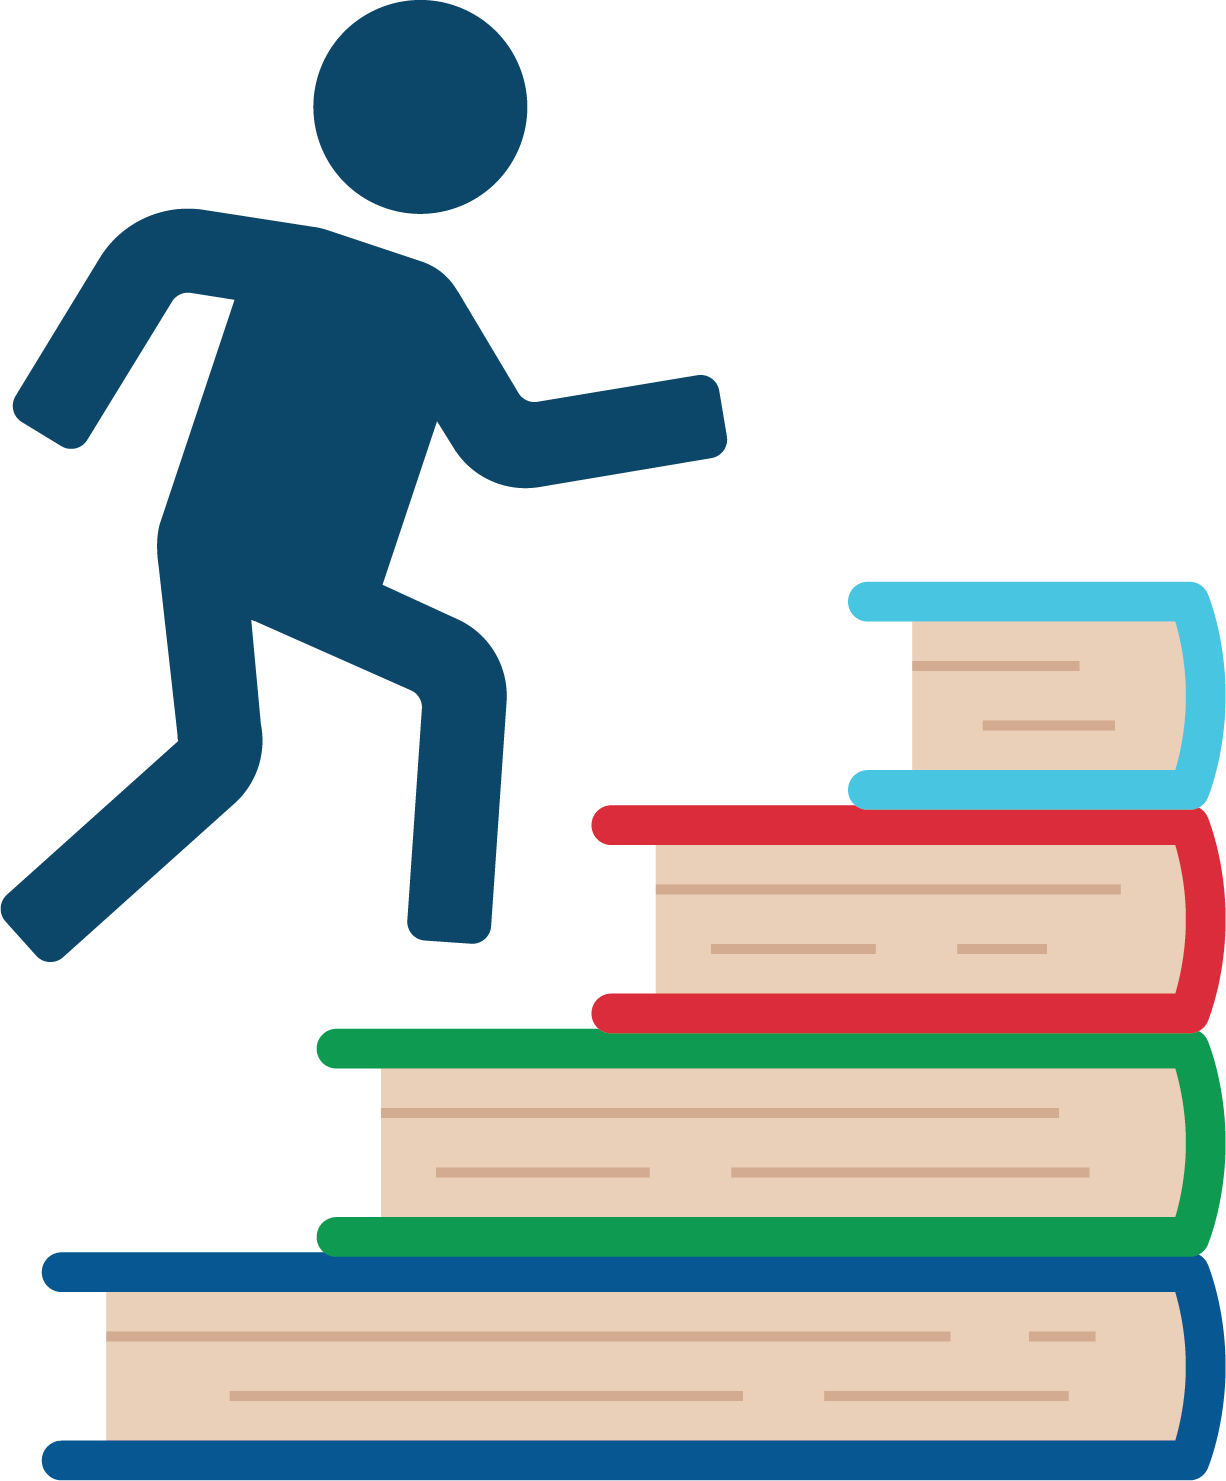 An animated image of a stick figure person running up a staircase made of four books. A dark blue book on the bottom, a green book second to the bottom, a red book second from the top, and a bright blue book on top.